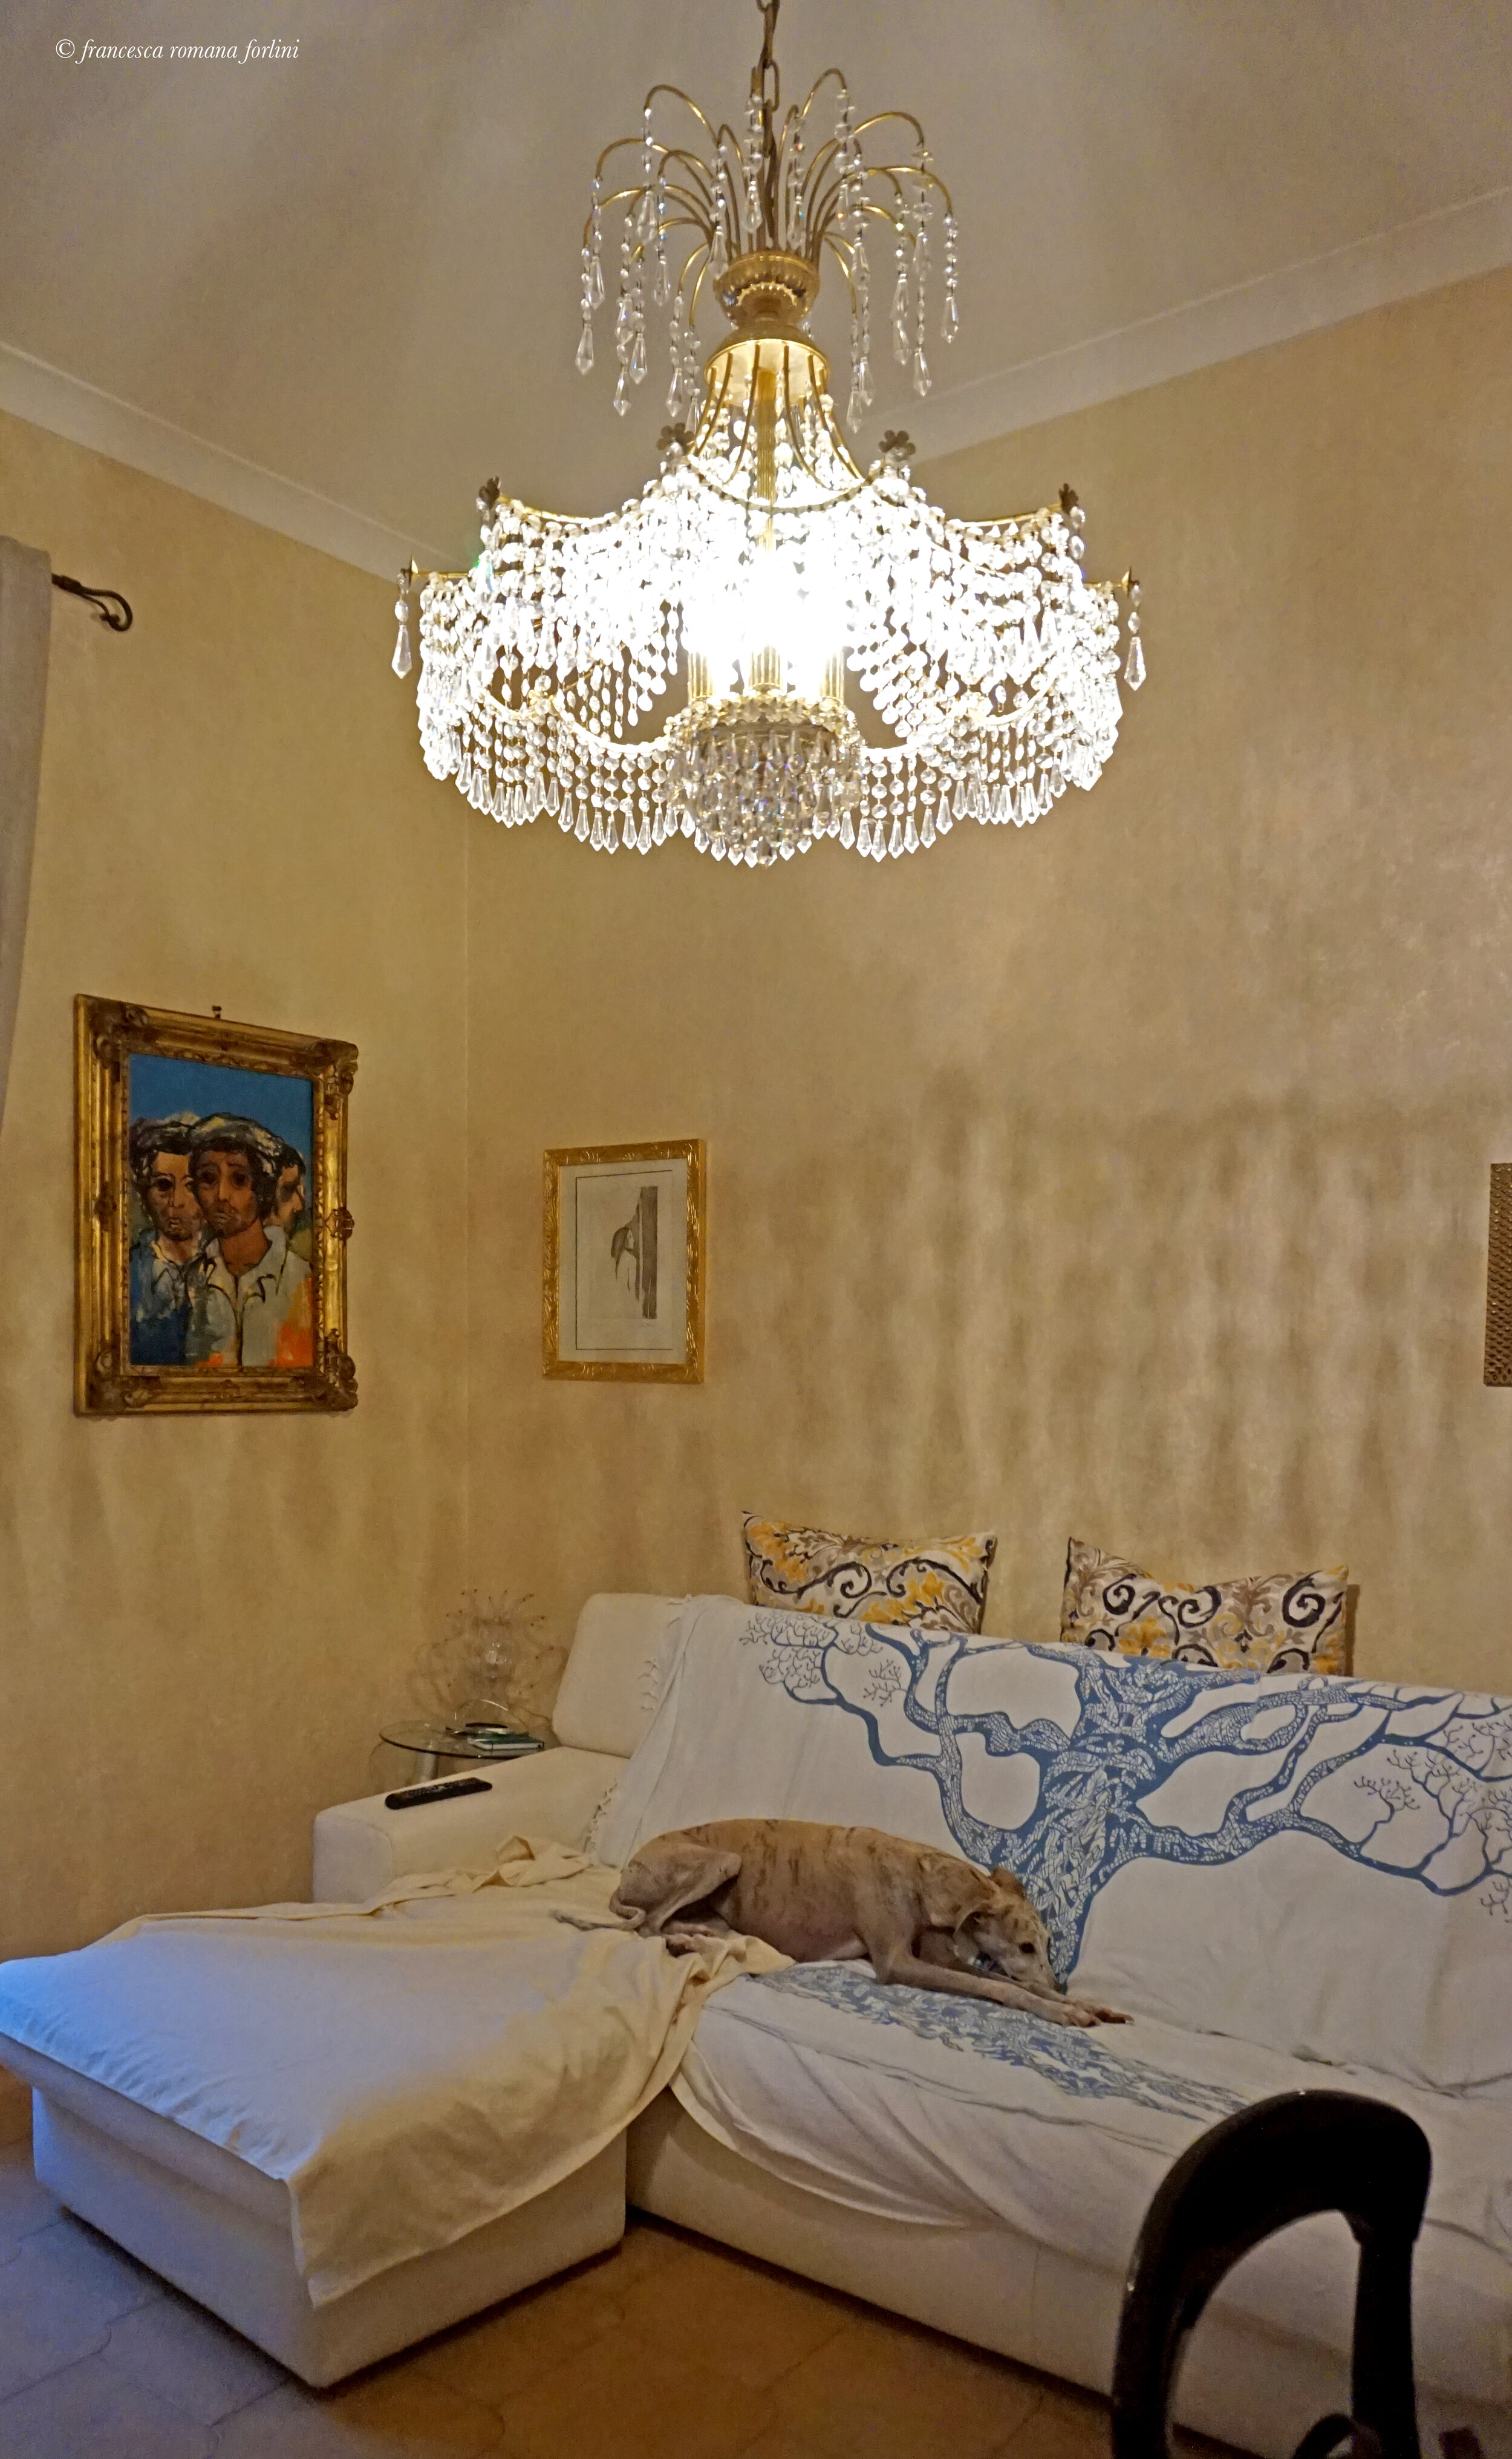  Salotto and a dog. Interior of an apartment in Via Metauro, Rome. 2019 